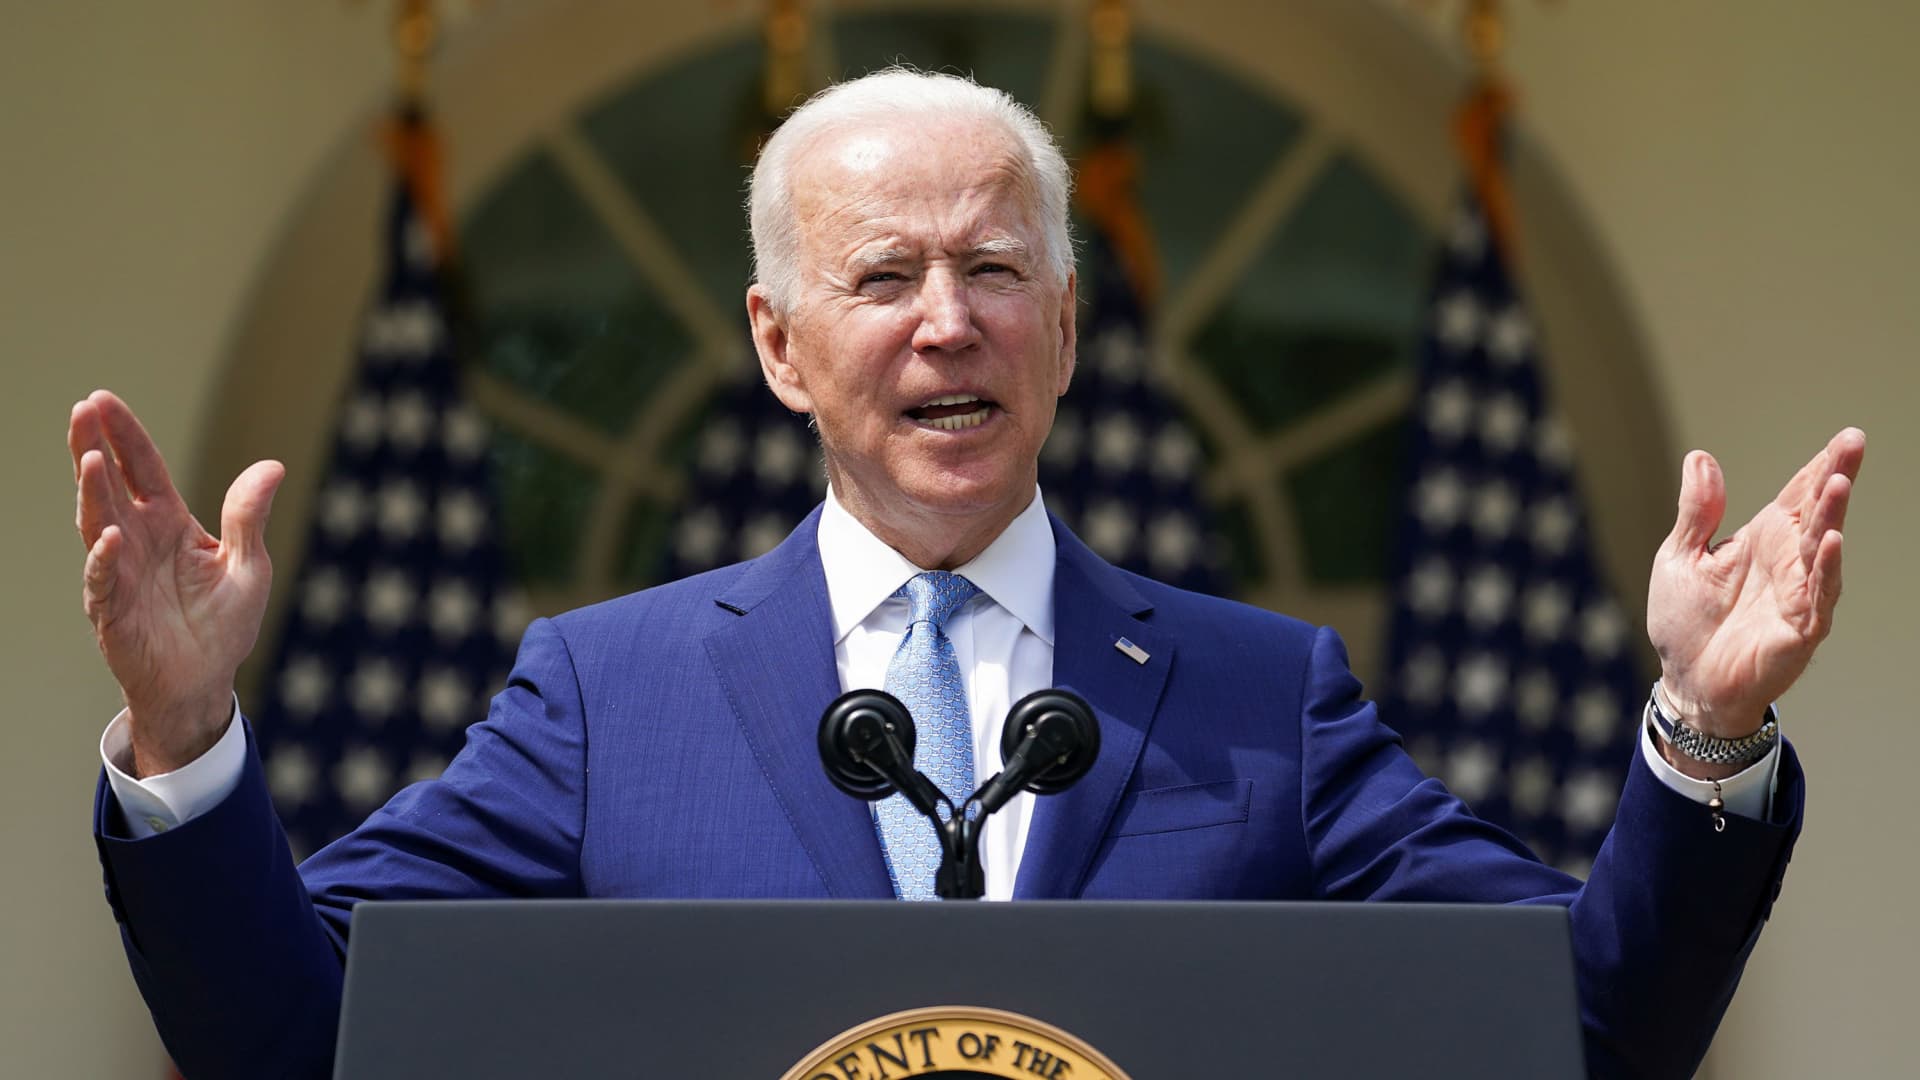 U.S. President Joe Biden speaks as he announces executive actions on gun violence prevention in the Rose Garden at the White House in Washington, April 8, 2021.